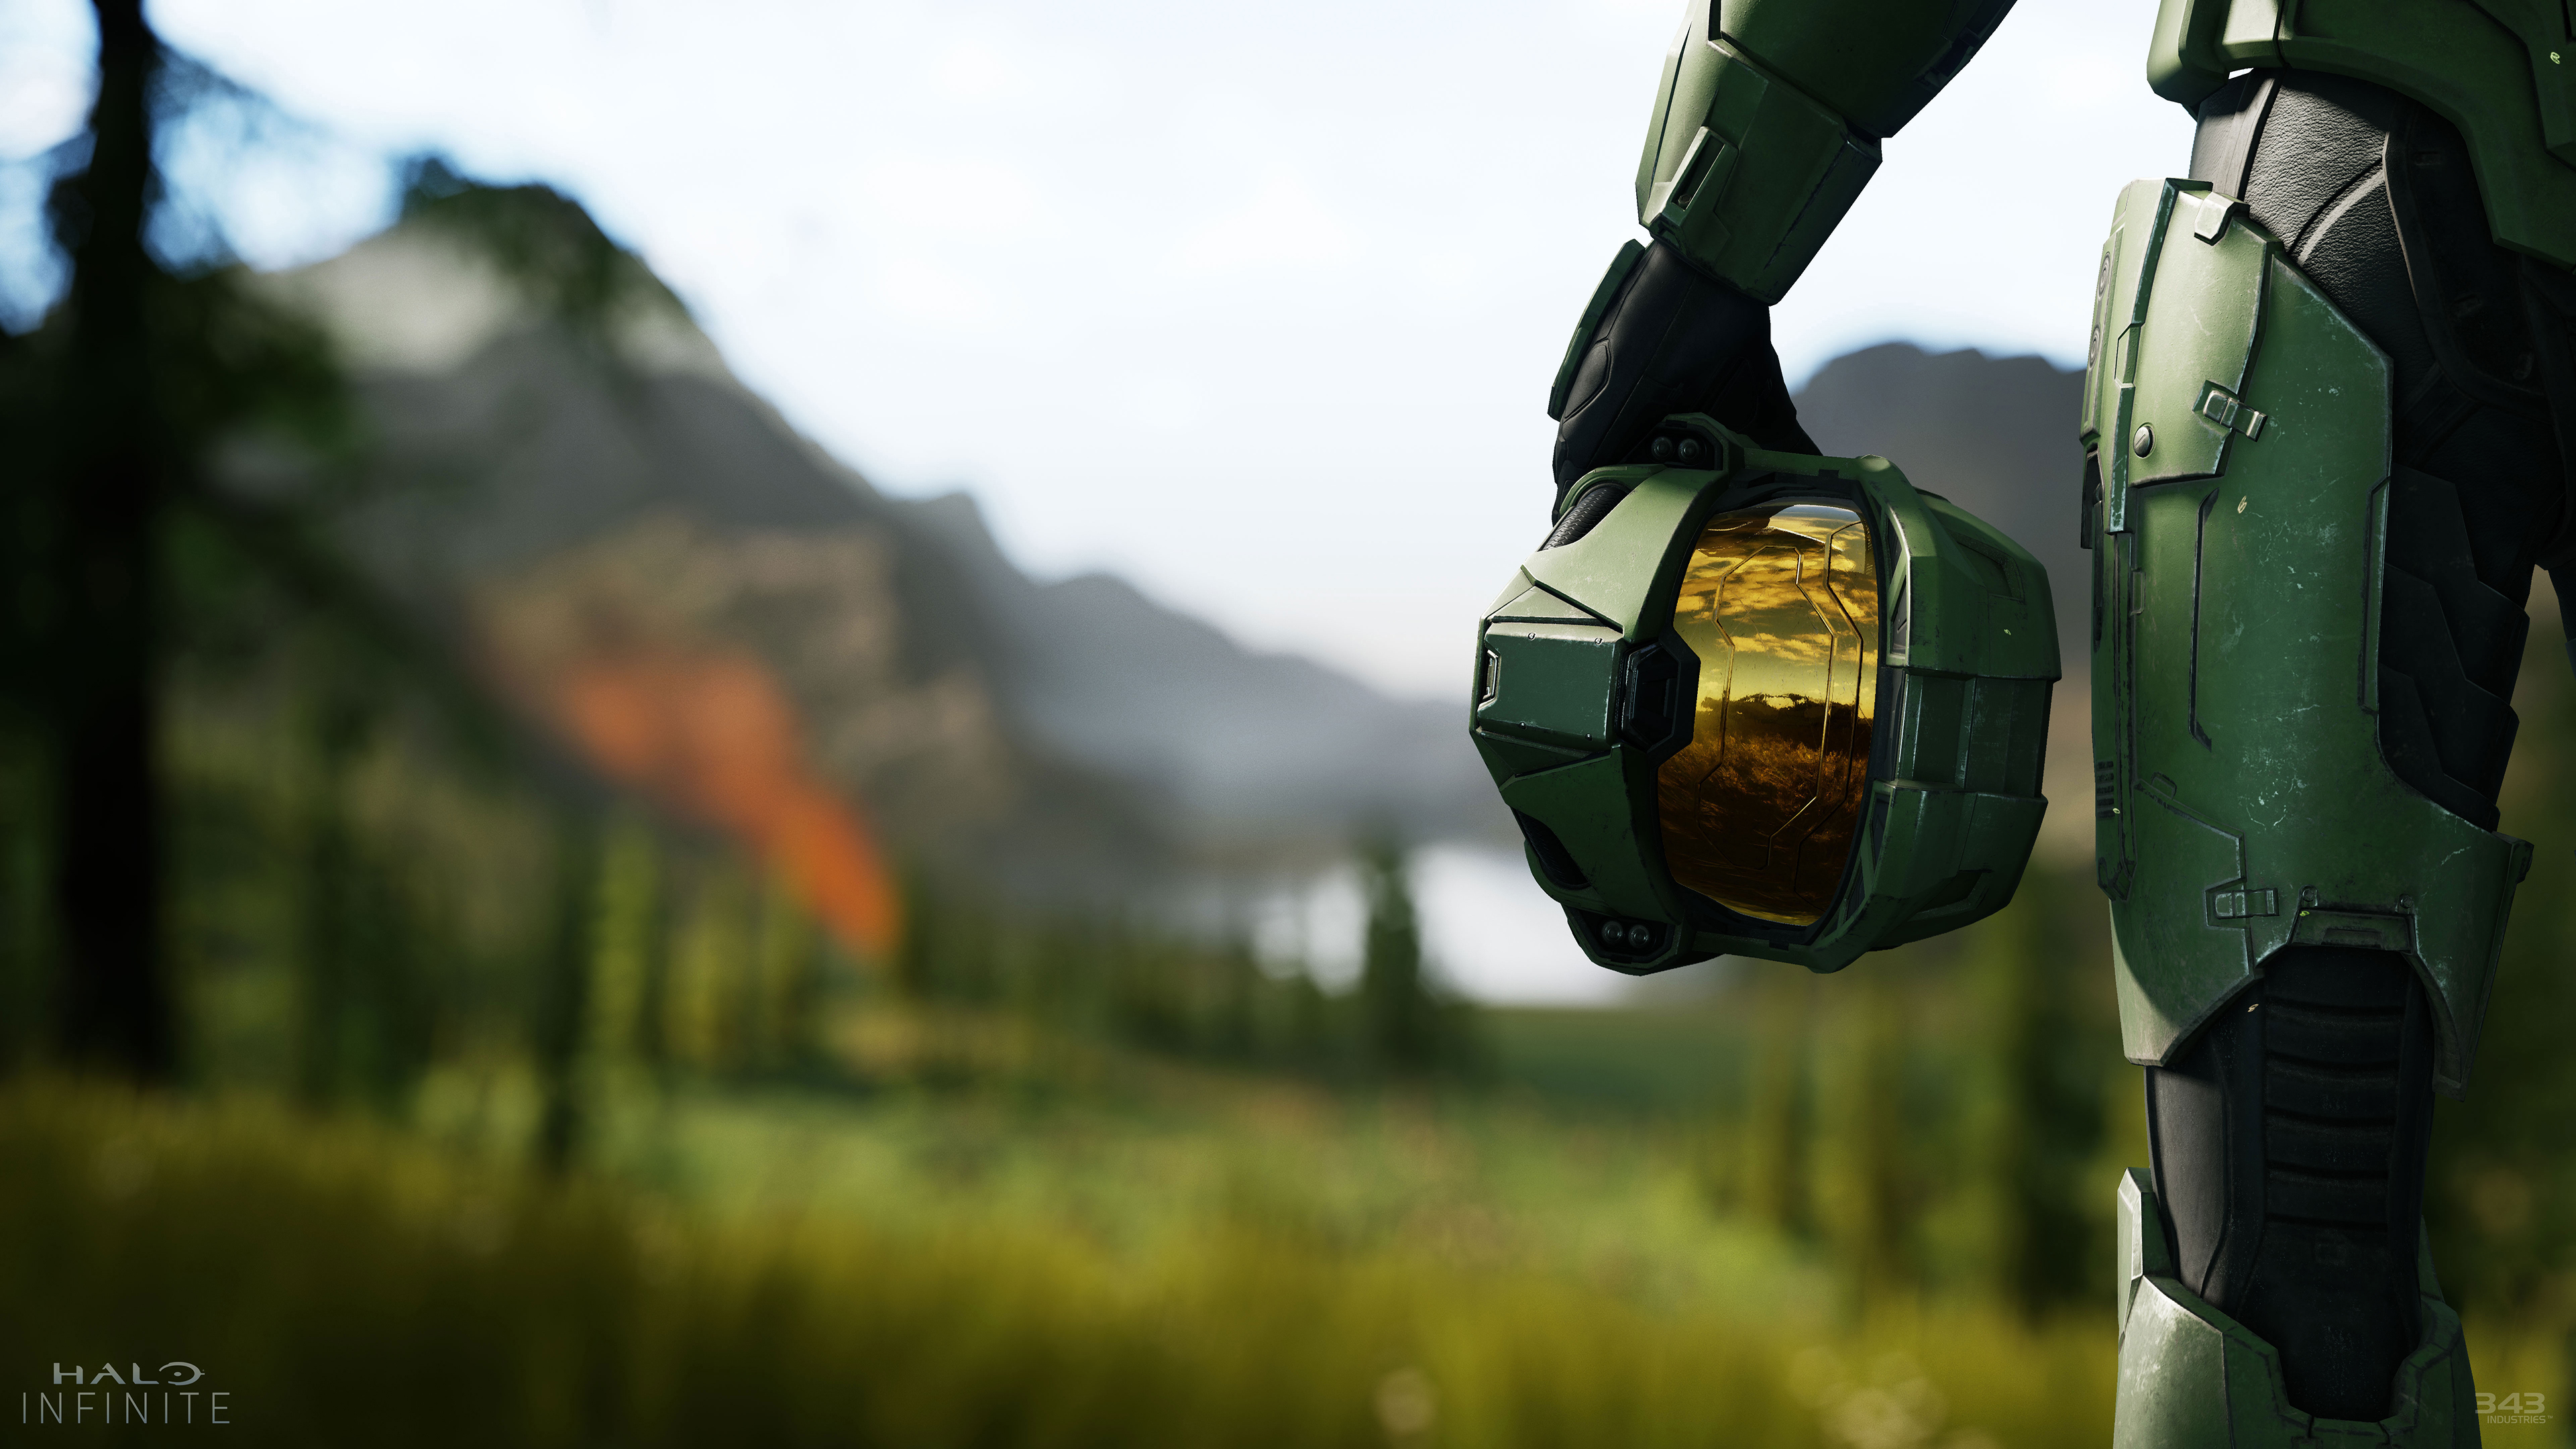 Halo Master Chief Science Fiction Military Soldier Xbox Xbox One Video Games 3840x2160